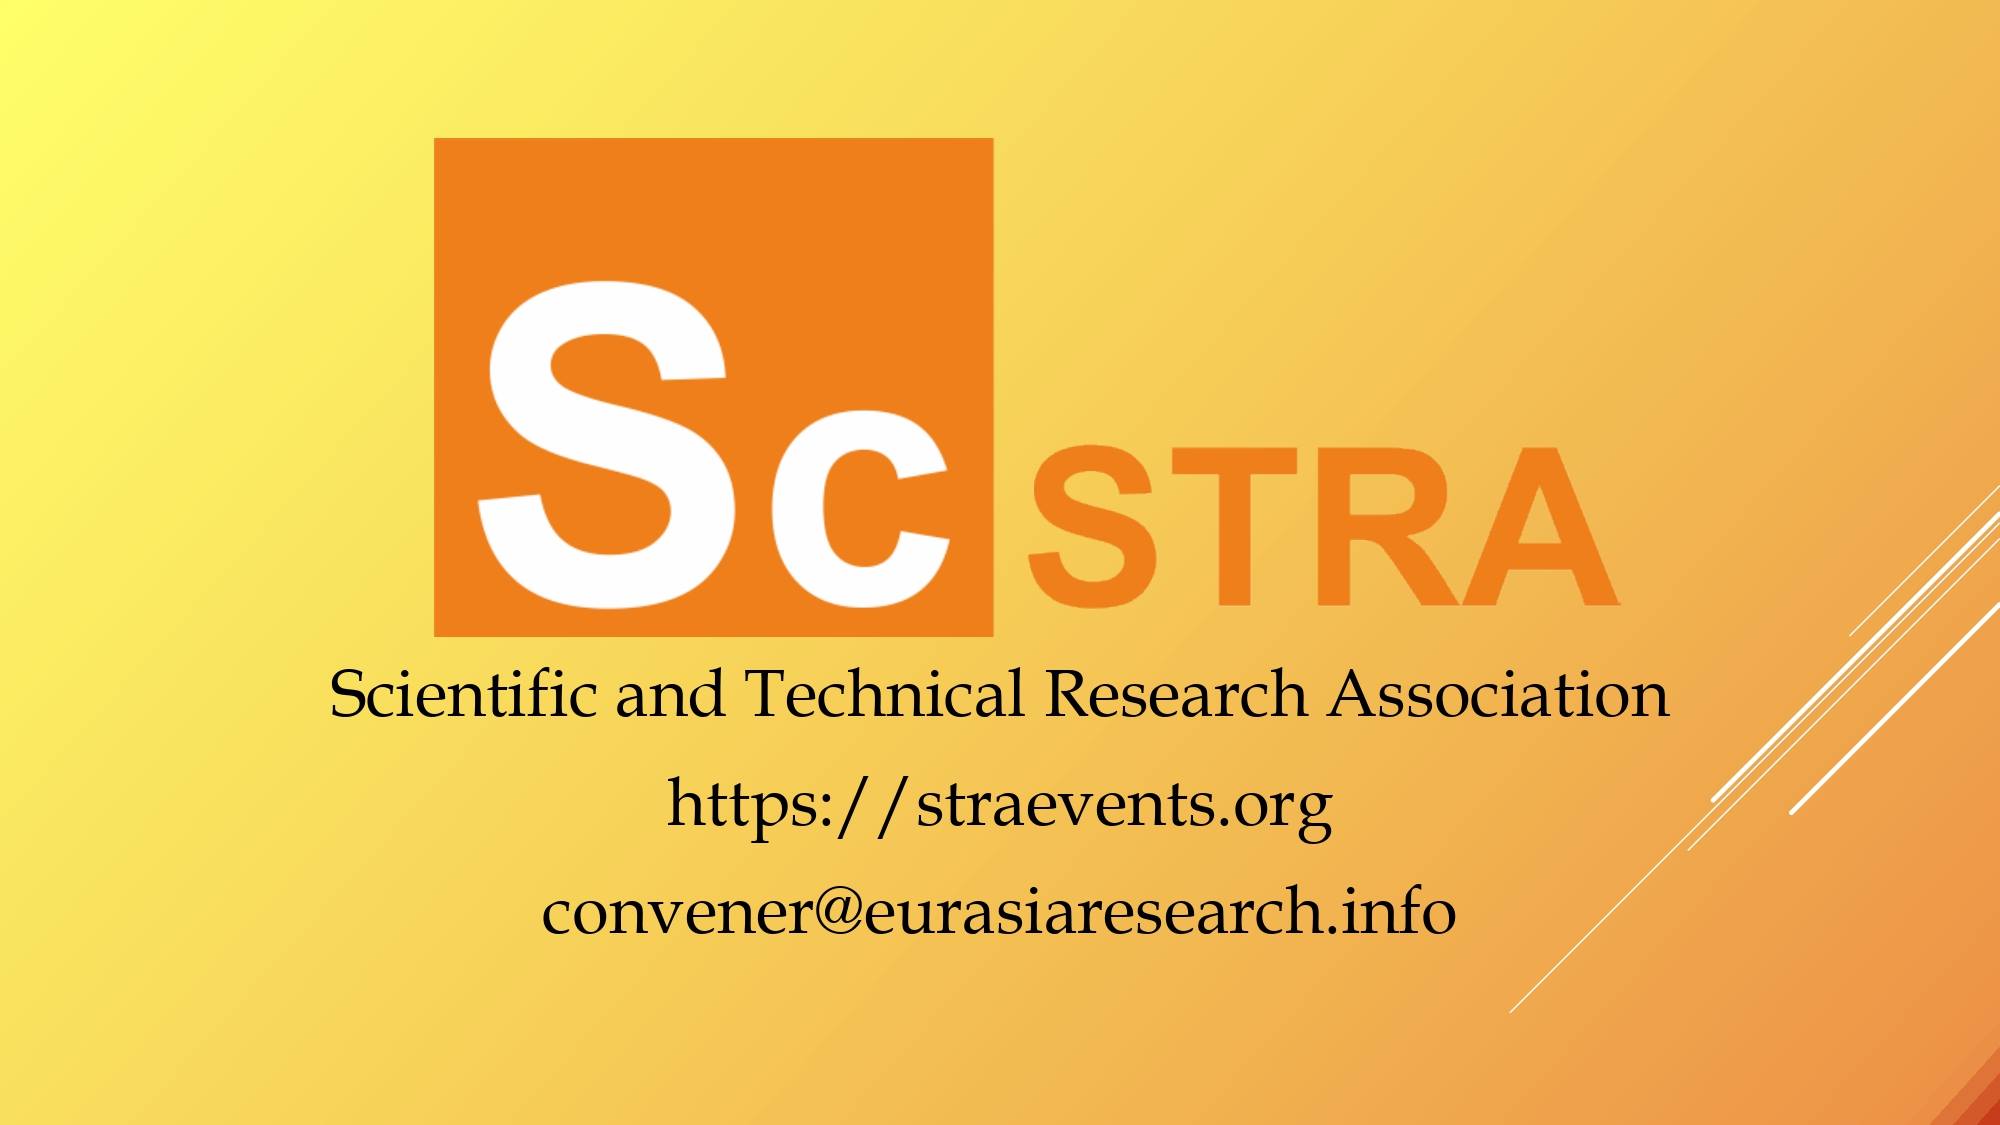  9th ICSTR Kuala Lumpur – International Conference on Science & Technology Research, 24-25 November 2022